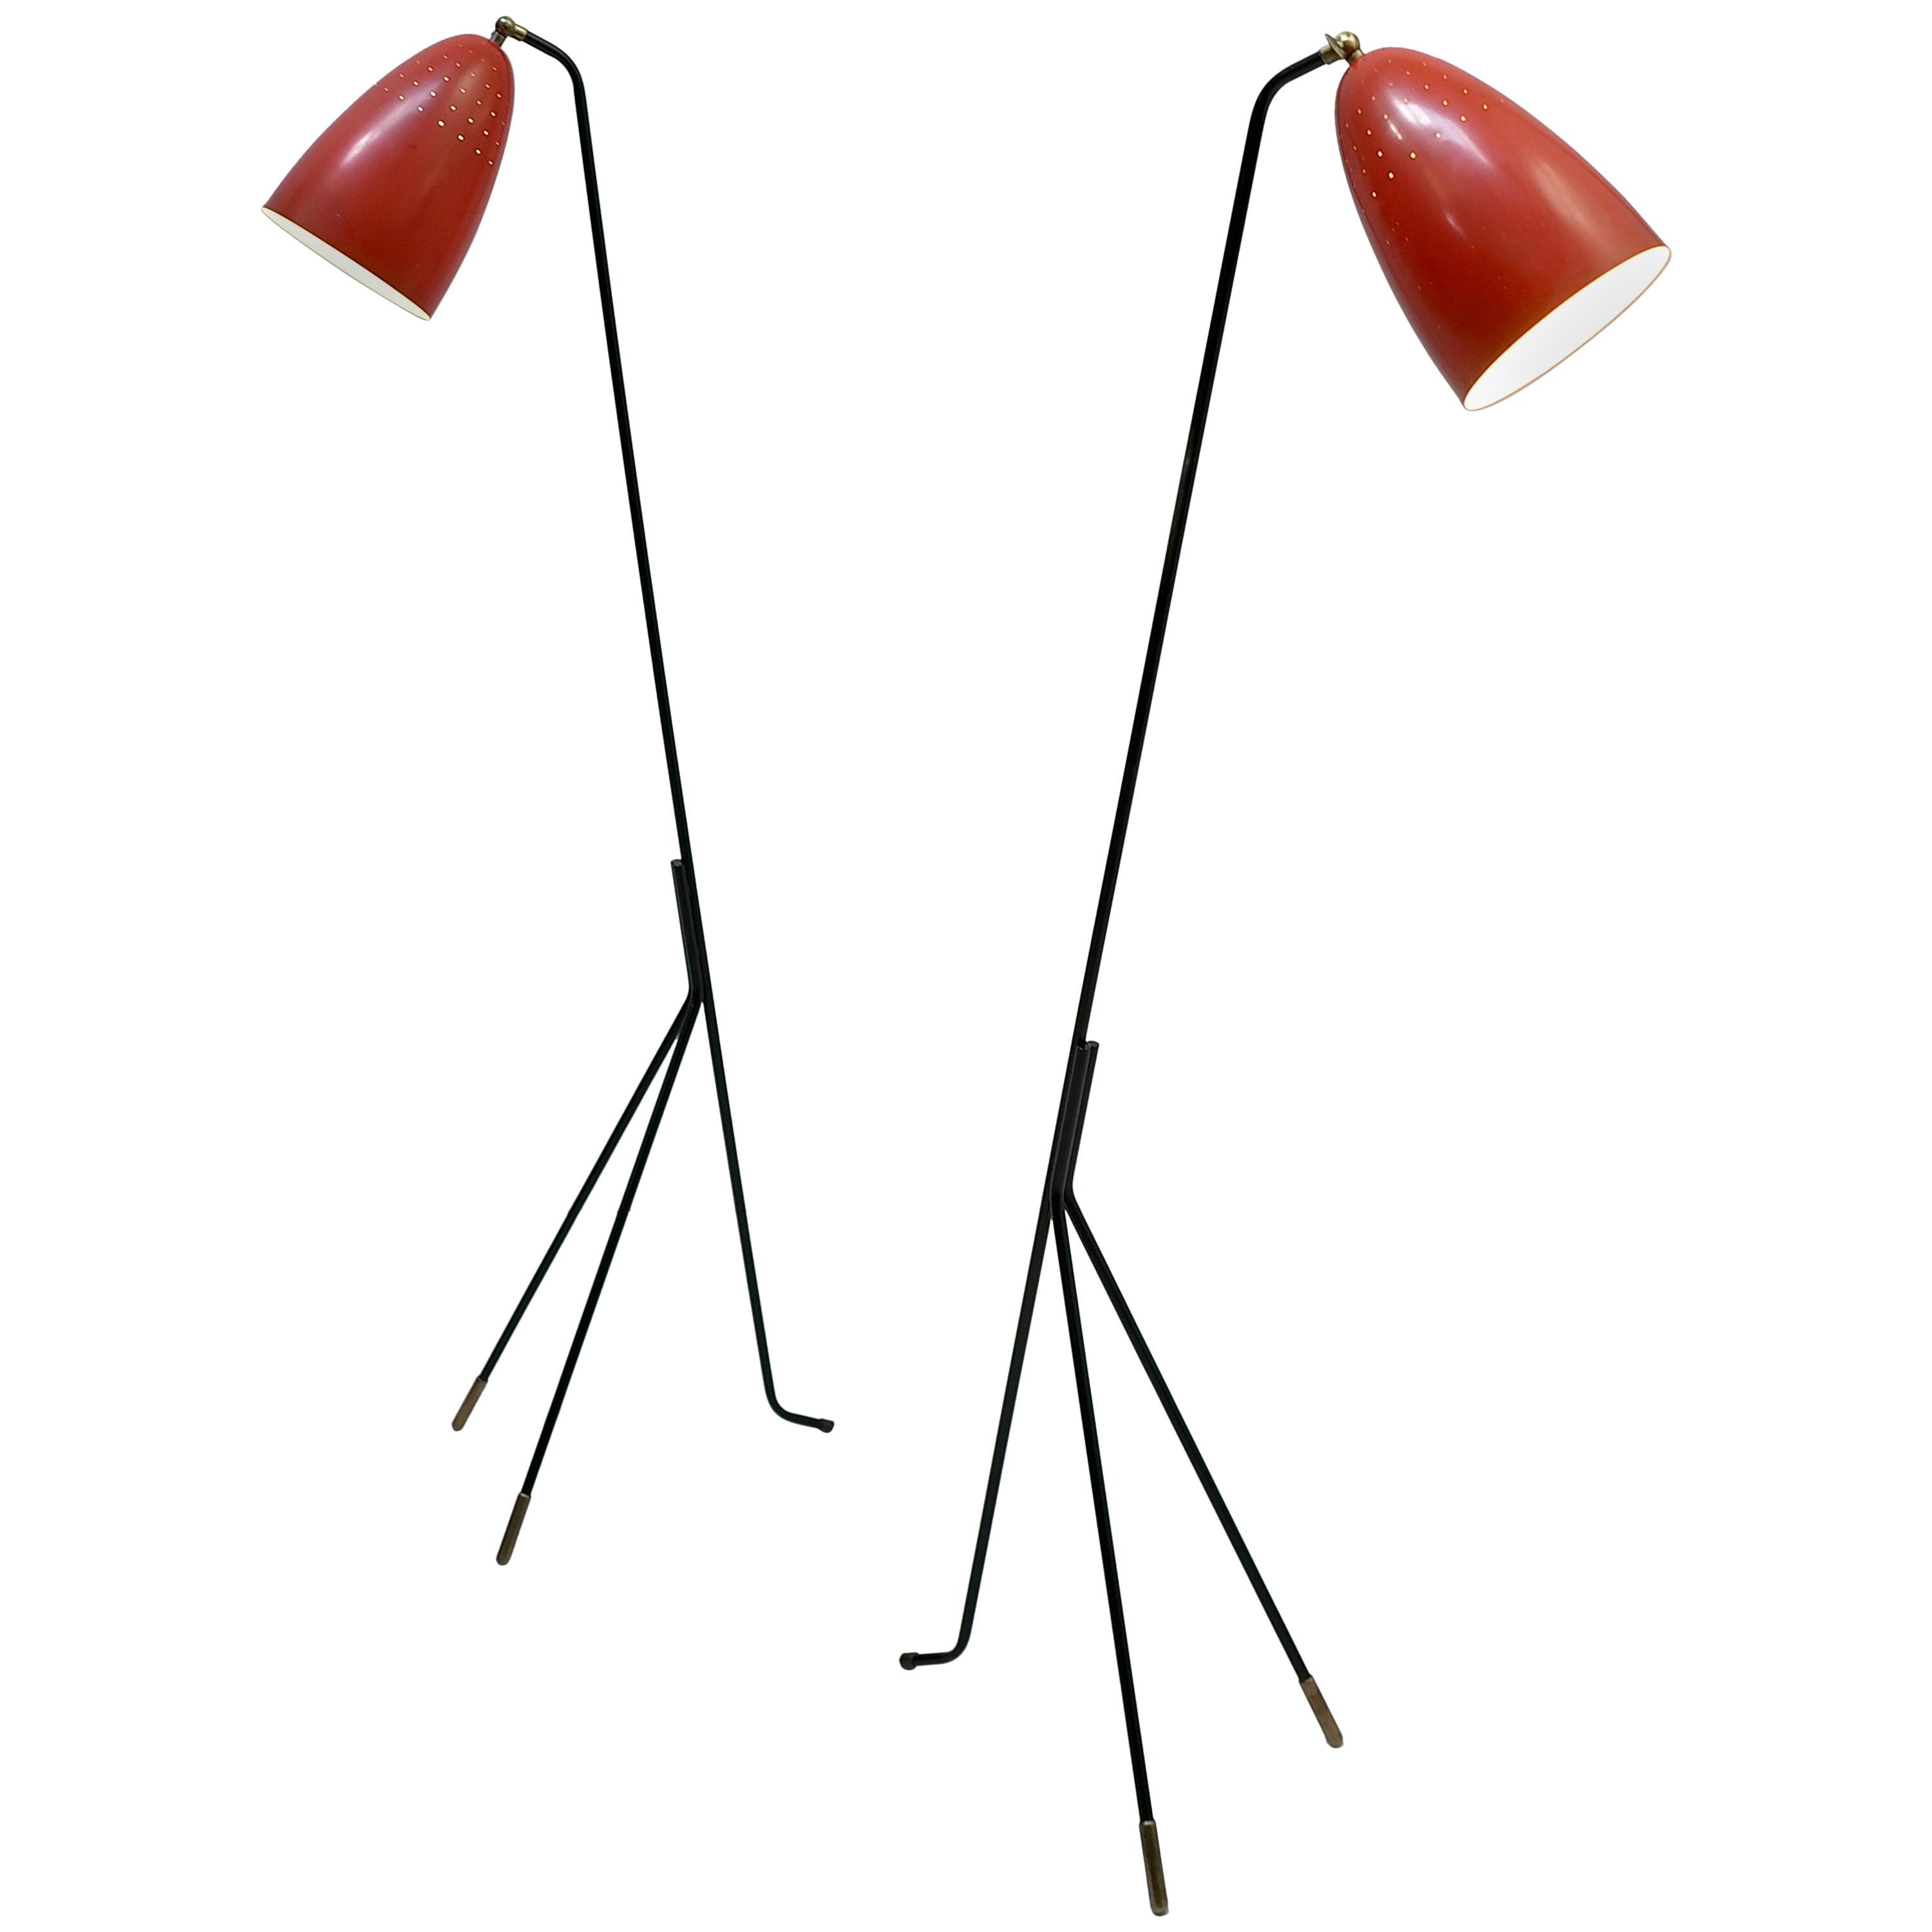 Pair of Red Danish Grasshopper Floor Lamps by Svend Aage Holm Sørensen For Sale